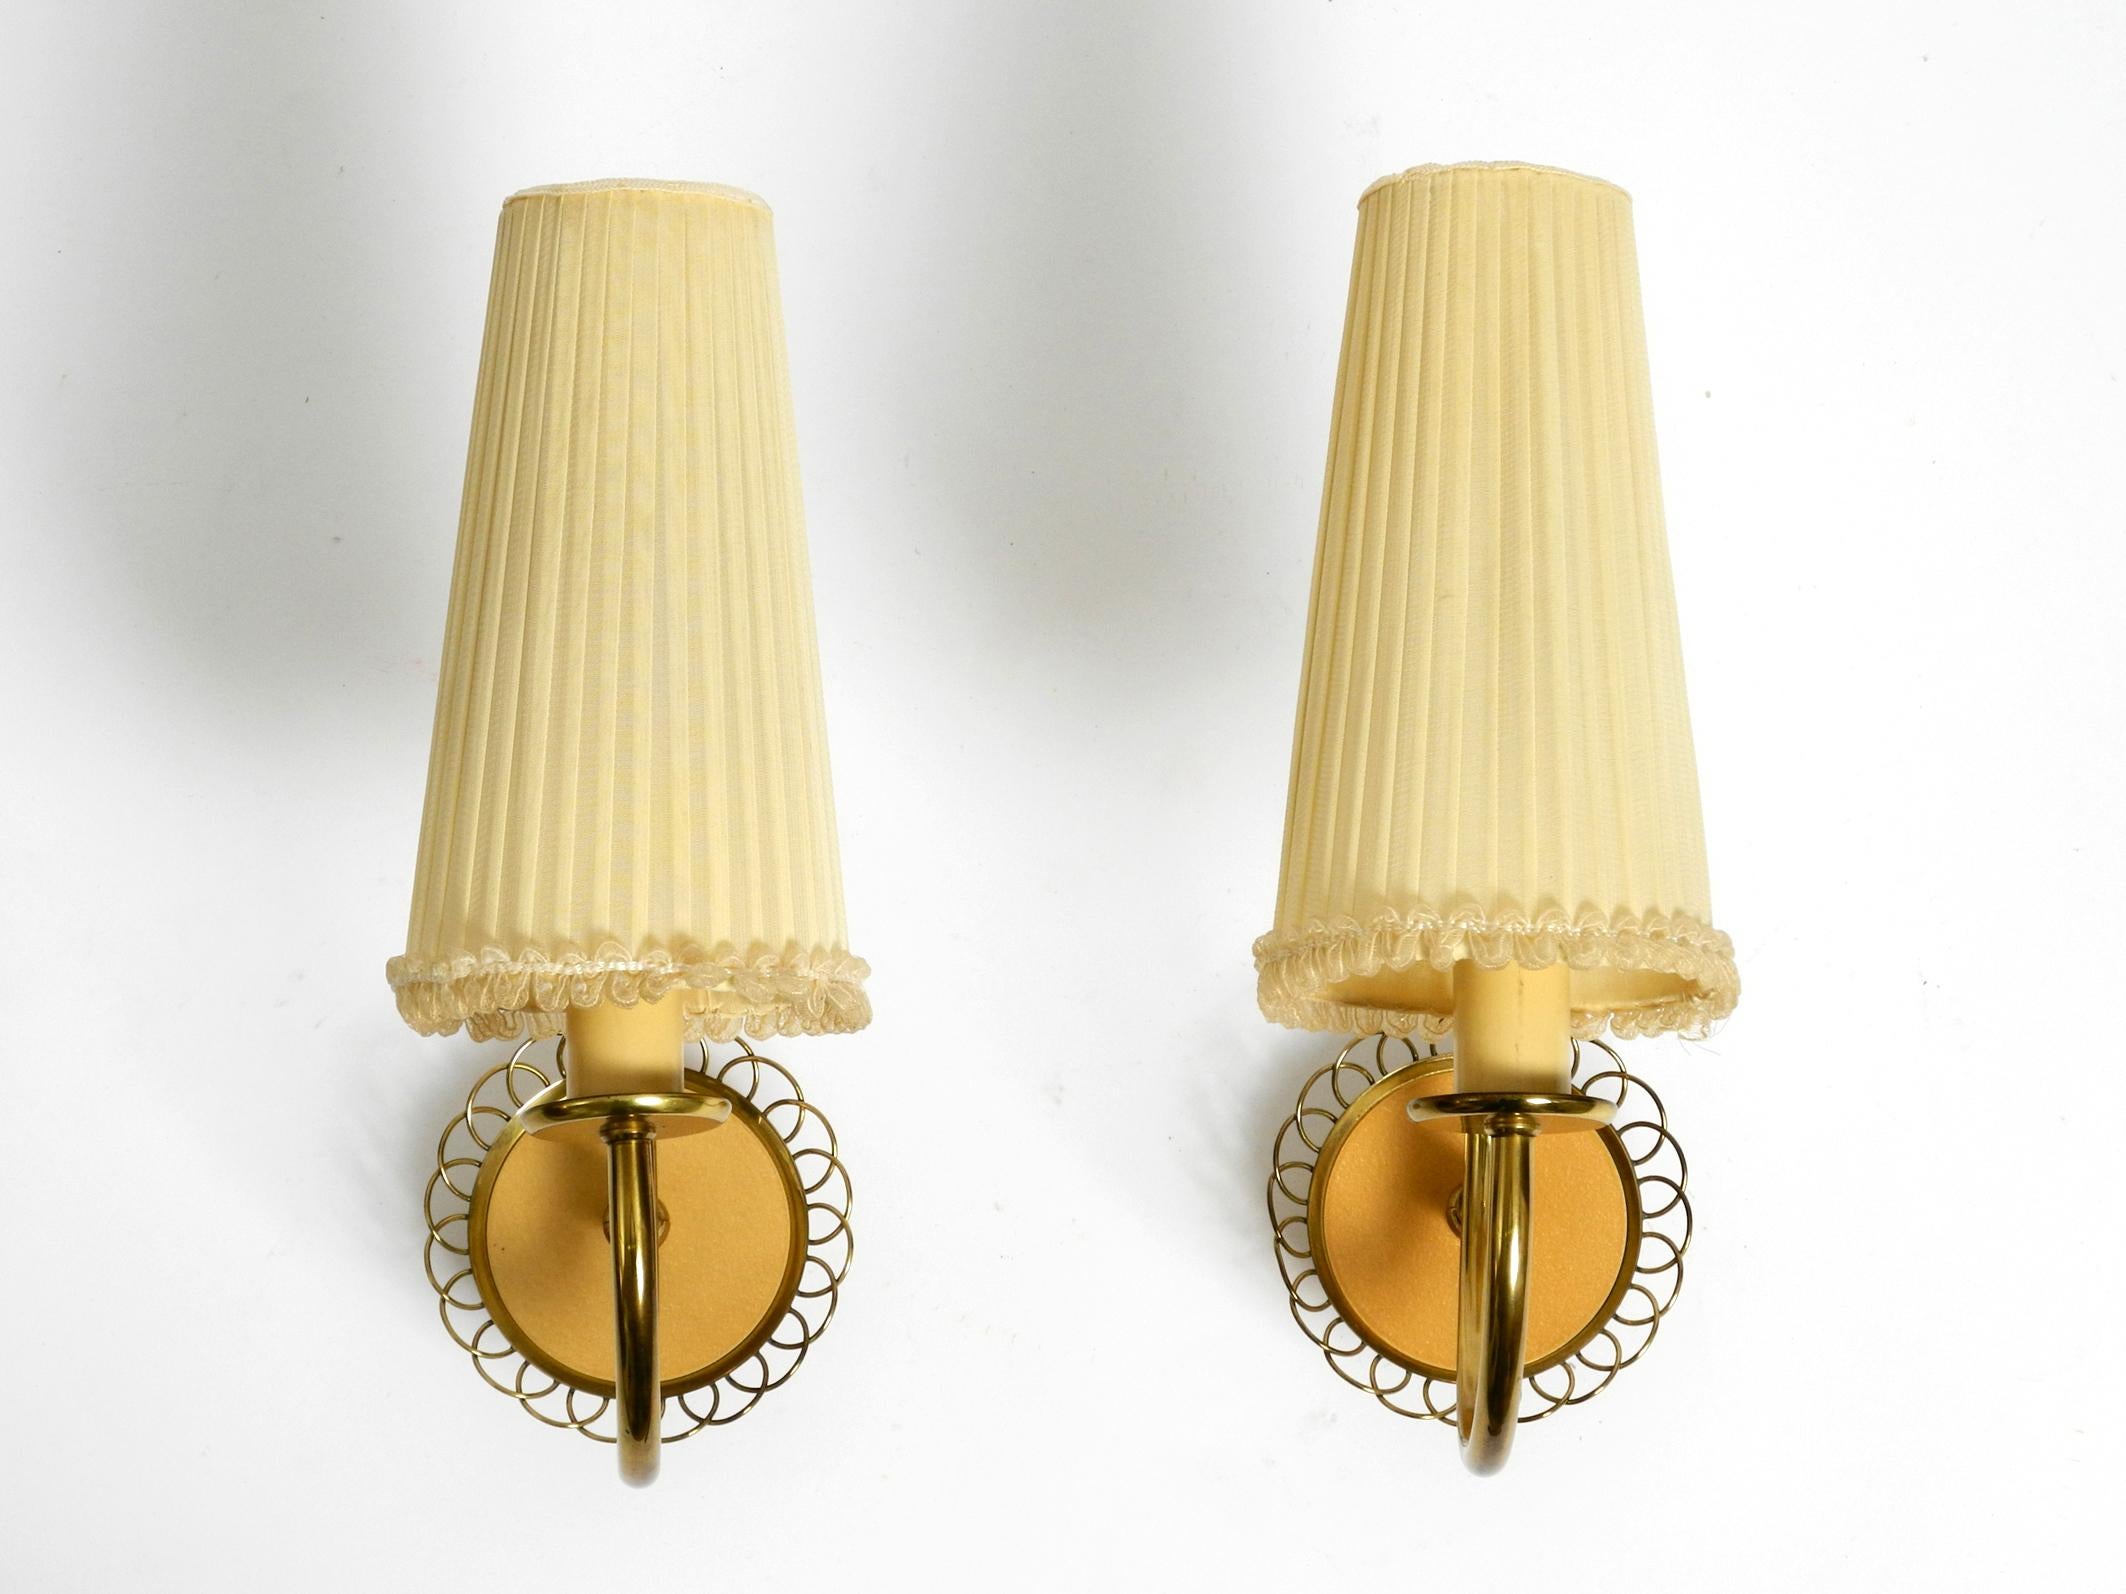 Pair of beautiful original mid century brass wall lamps from Vereinigte Werkstätten.
Made in Germany. With the original silk lampshades
Great high quality 1950s design.
The arms can be moved continuously to the left and right. Holds in any